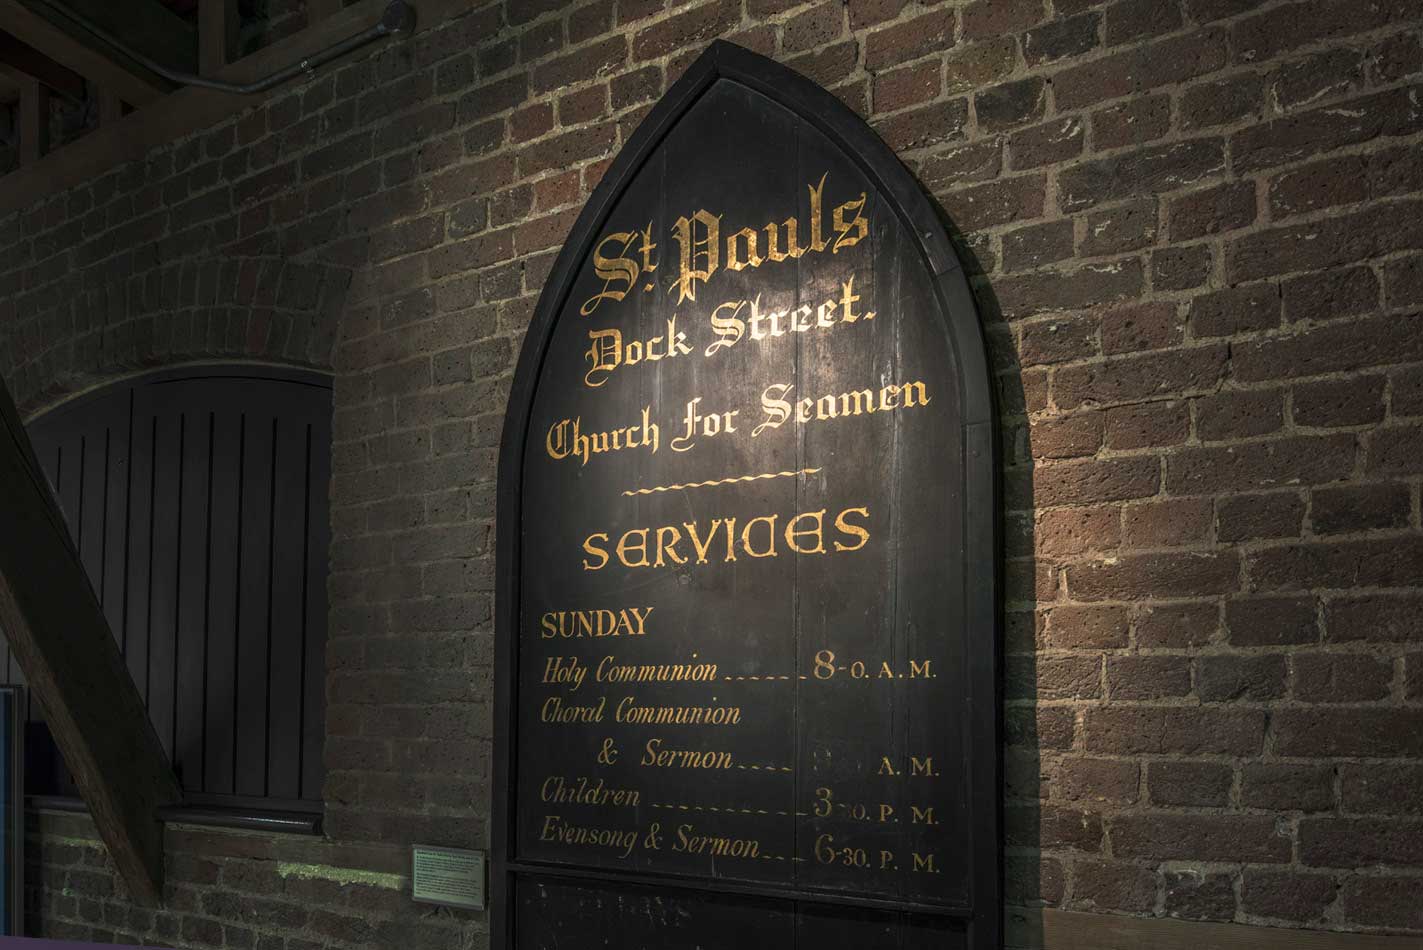 The sign of the St. Paul's Seamans' Church.